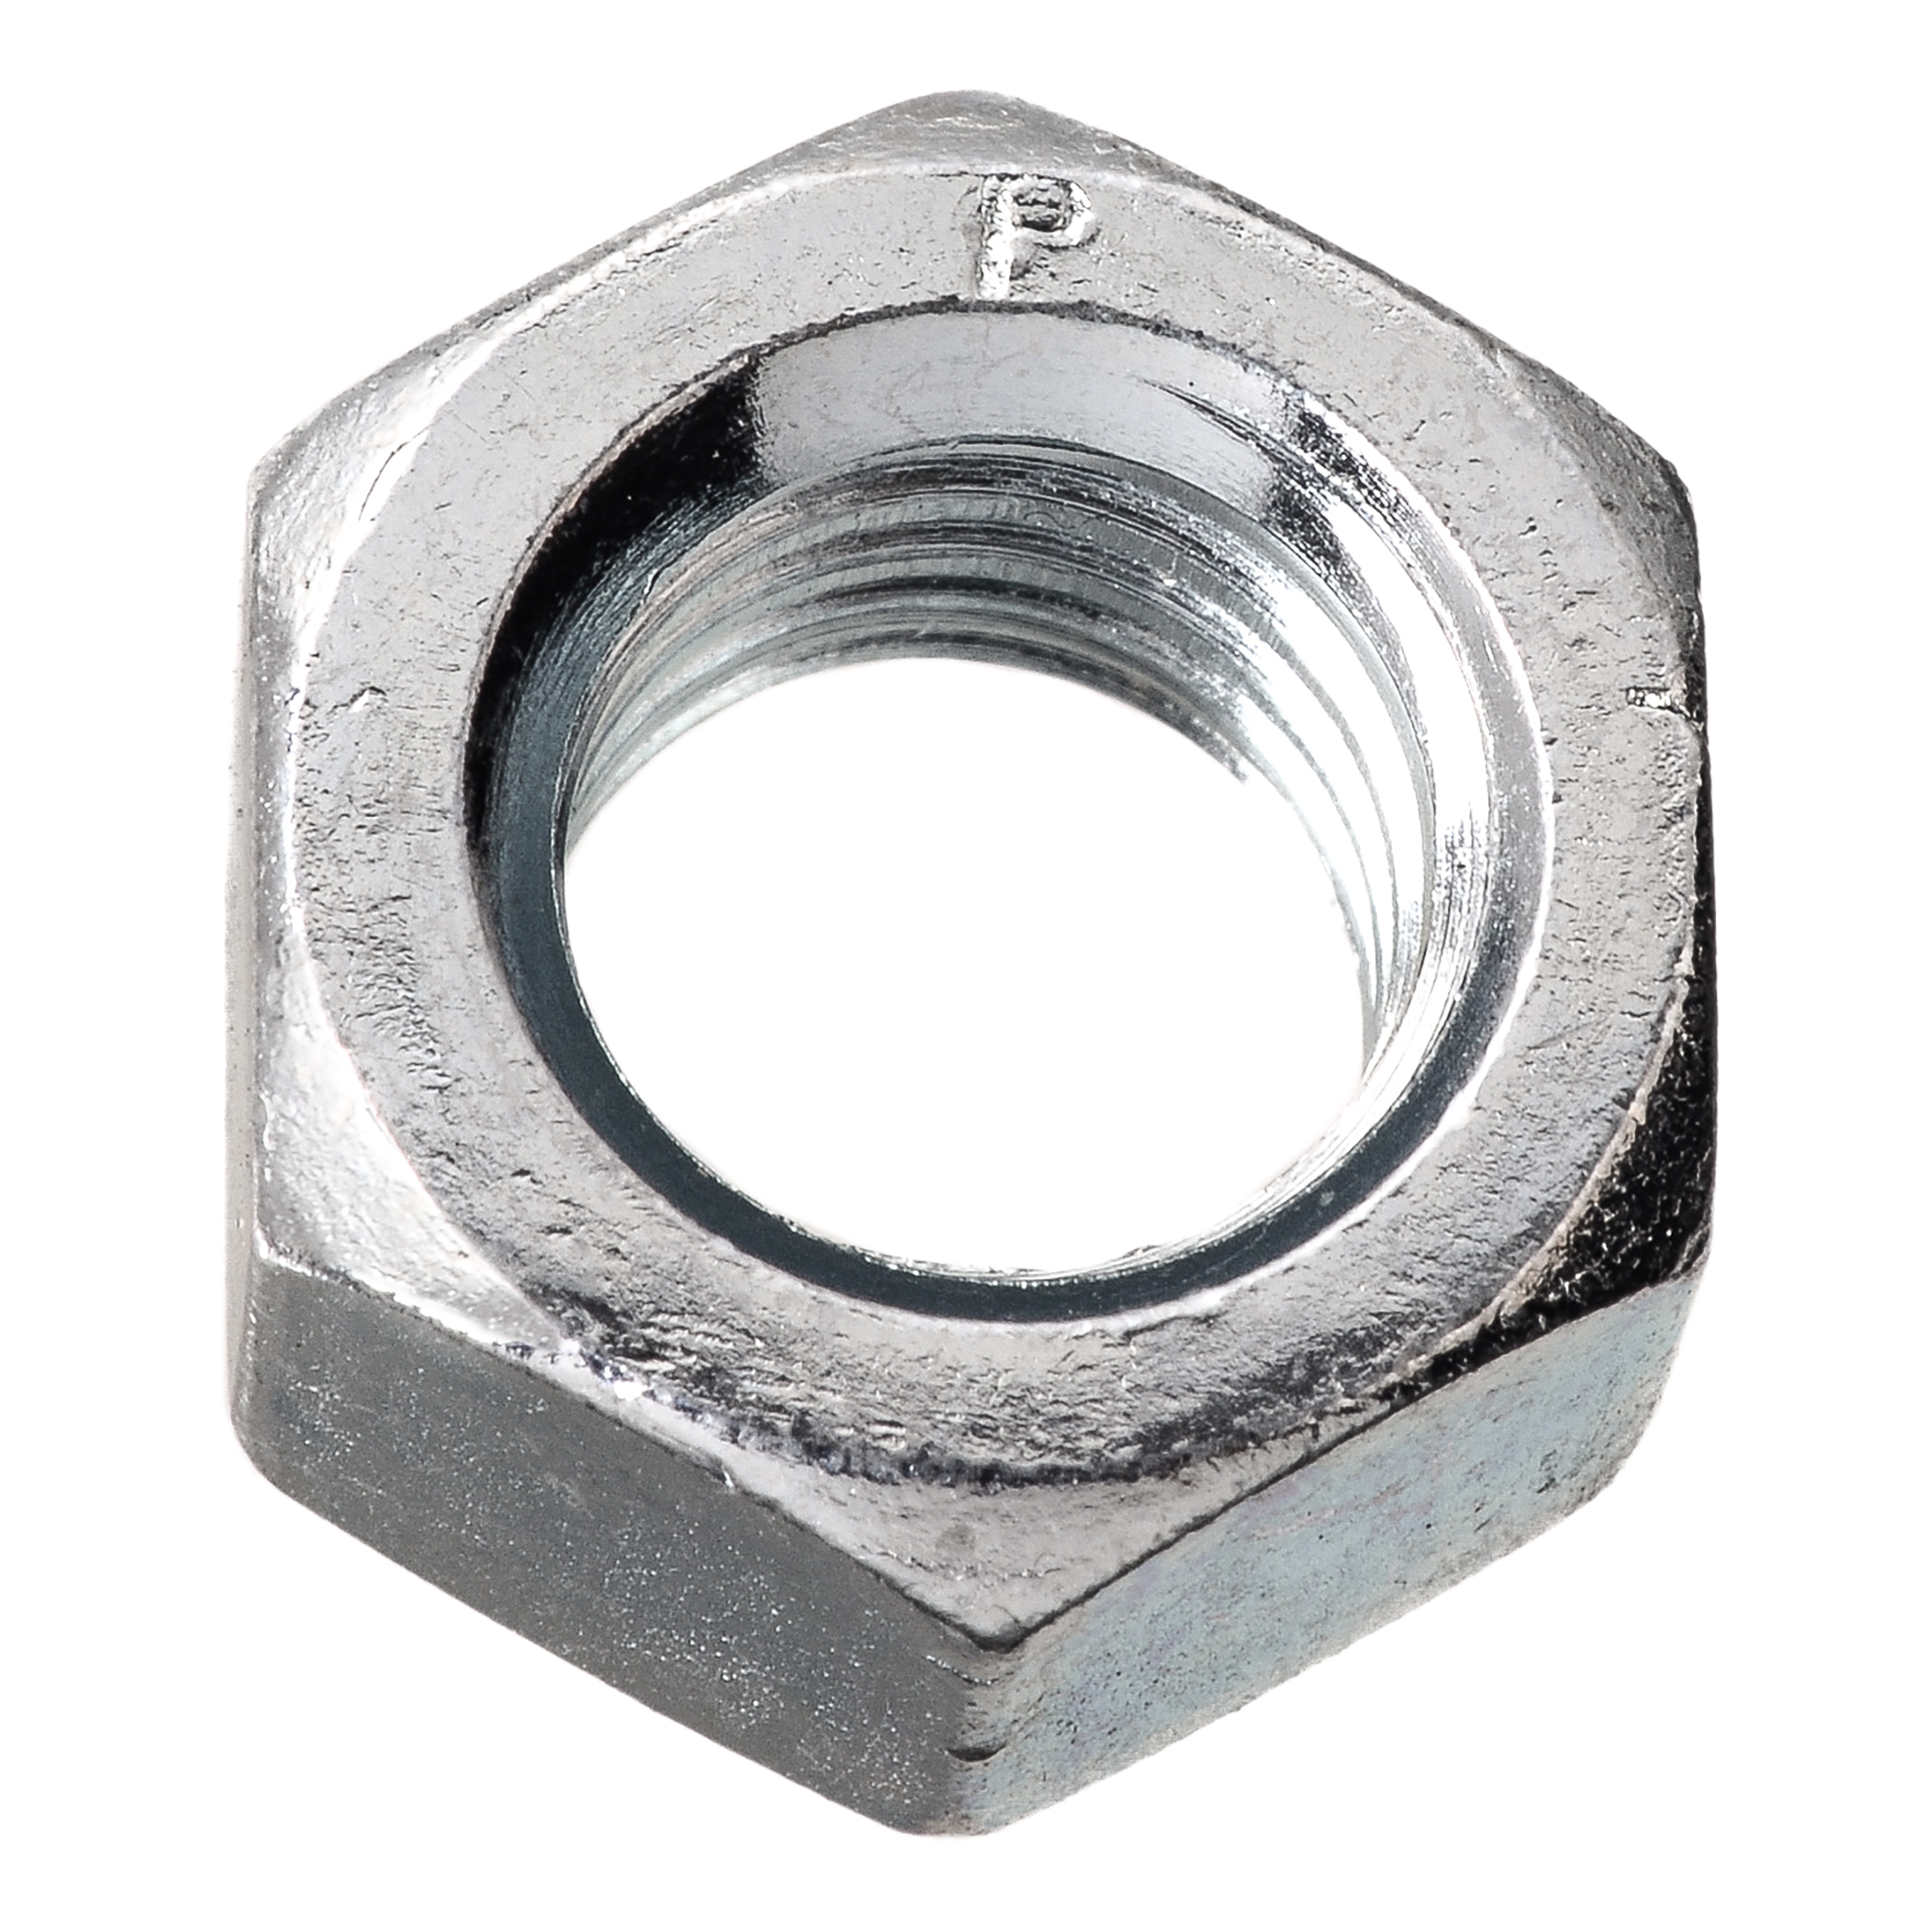 1/4-20 Stainless Steel Flange Nuts Serrated Base Lock Anti Vibration Qty 1000 